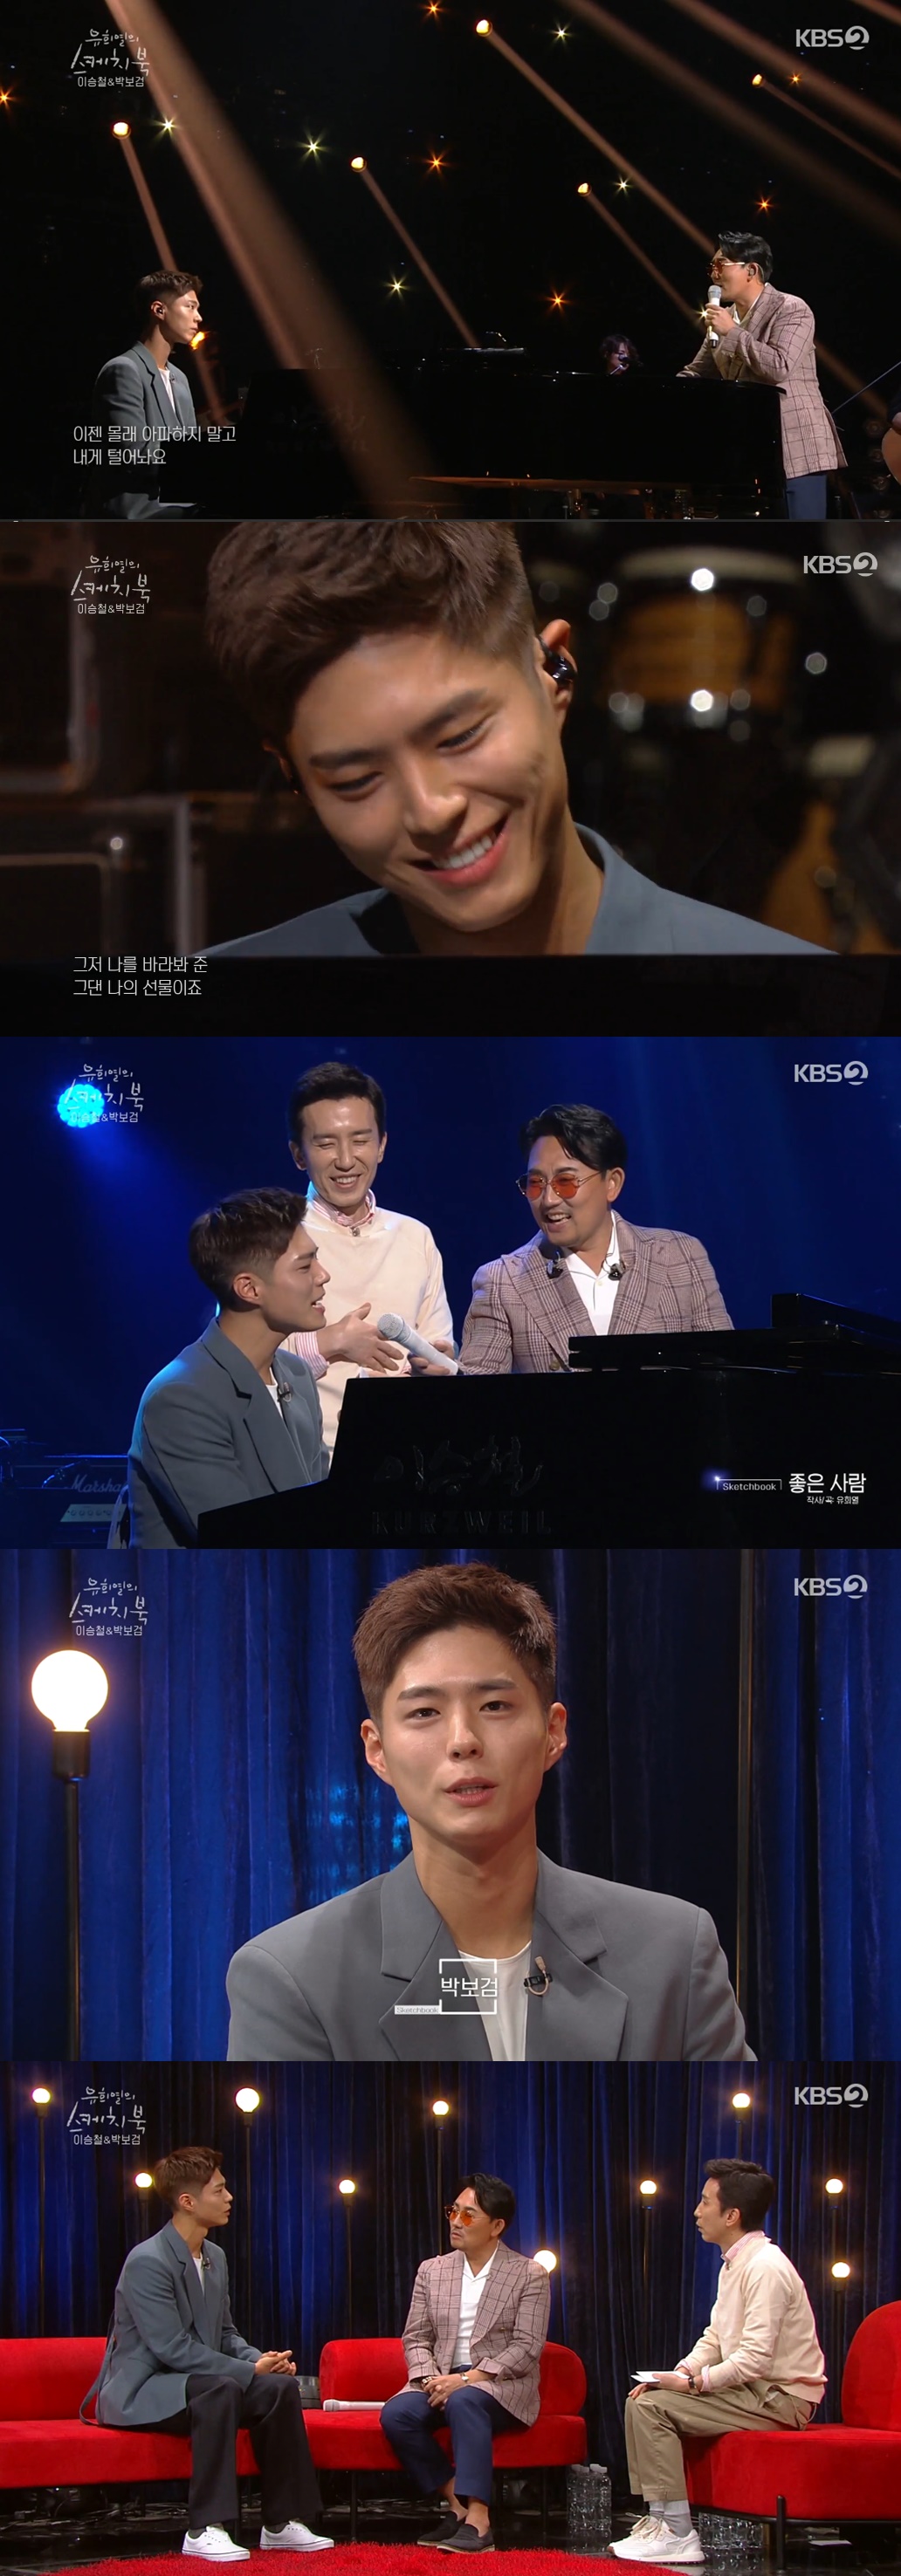 You Hee-yeols Sketchbook Park Bo-gum presented Lee Seung-cheol and the fantasy Collabo.Actor Park Bo-gum first appeared on KBS 2TV entertainment program You Hee-yeols Sketchbook, which was broadcast on the 20th, and released his outstanding performance.On this day, actor Park Bo-gum appeared together with singer Lee Seung-cheol who celebrated his 35th anniversary and made the Collabo stage together.The two people who made a relationship with the singer and the music video protagonist in the OST of the webtoon Moonlight Sculptor released in January this year prepared a special stage.Park Bo-gum played the piano accompaniment of I love you a lot and Lee Seung-cheol sang and showed perfect breathing and strengthened eyes and ears.On the other hand, Park Bo-gum was enthusiastic about Lee Seung-cheols West Sky and Toys Good Man at the request of You Hee-yeol on the spot, and he was as good as a singer.Park Bo-gum then re-played the chopstick march again in the proposal of You Hee-yeol, and completed the doppelganger-down harmony and attracted attention.Park Bo-gum, who dreamed of being a singer before his debut as an actor, said, I became an actor with the suggestion of my representative.However, he said that he has not yet let go of his dream for his fans, and he confessed that he is preparing for the project and the project of Antenna Music, and expected Park Bo-gum to transform from actor to musician.